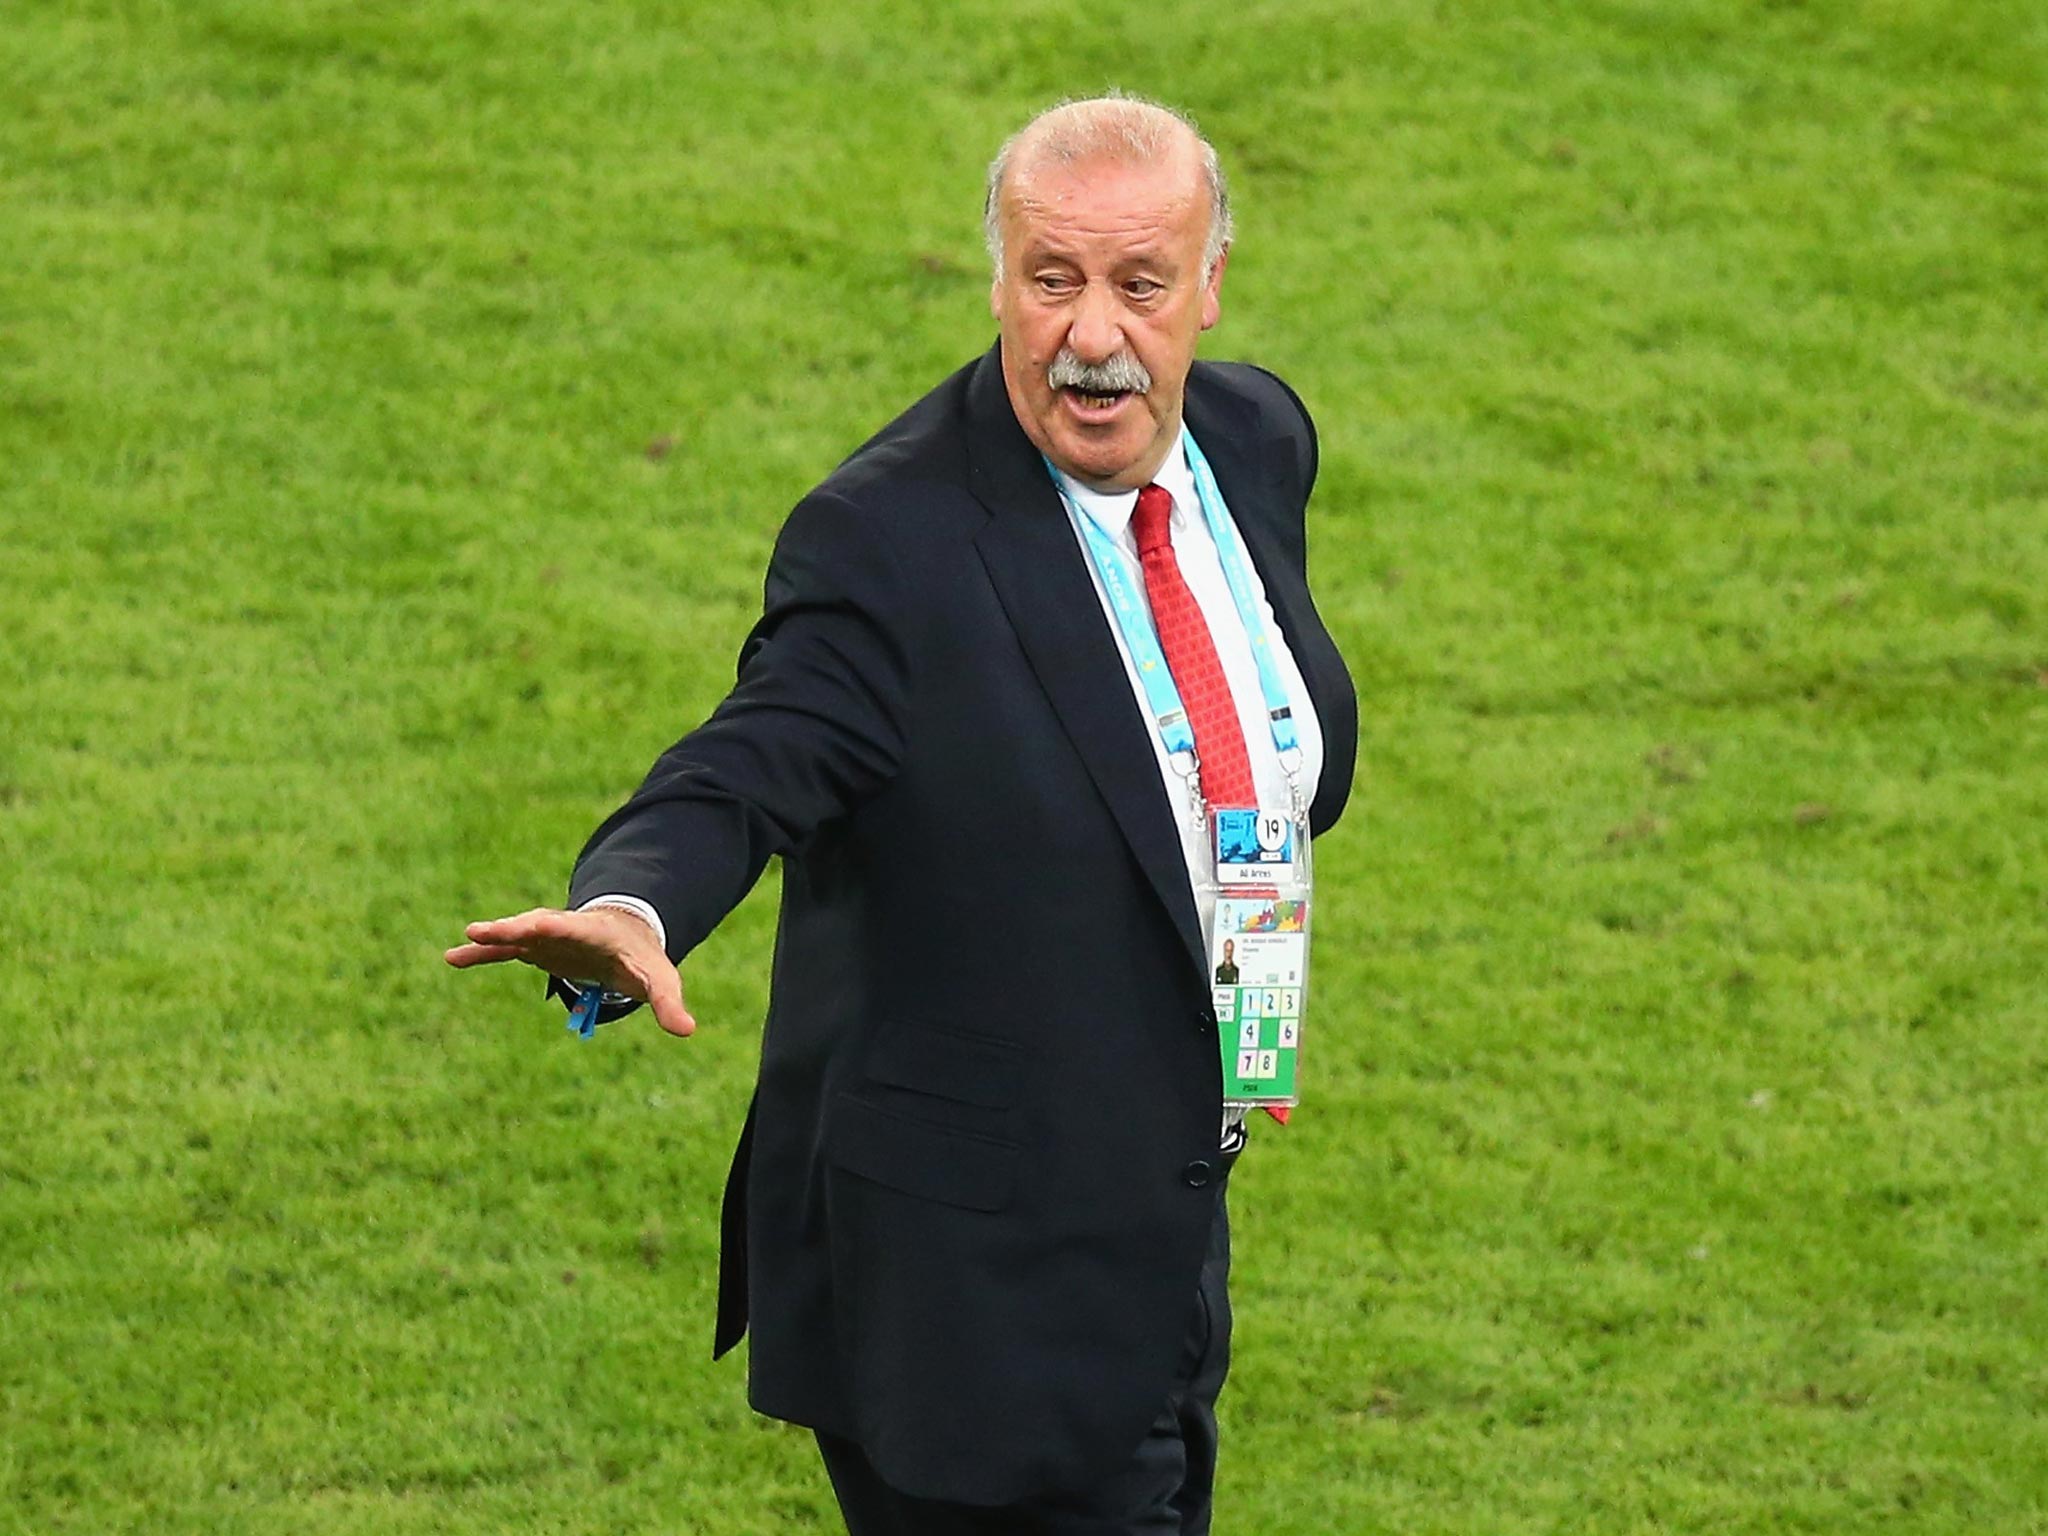 Vicente del Bosque was not willing to be bold enough when it came to dropping declining players